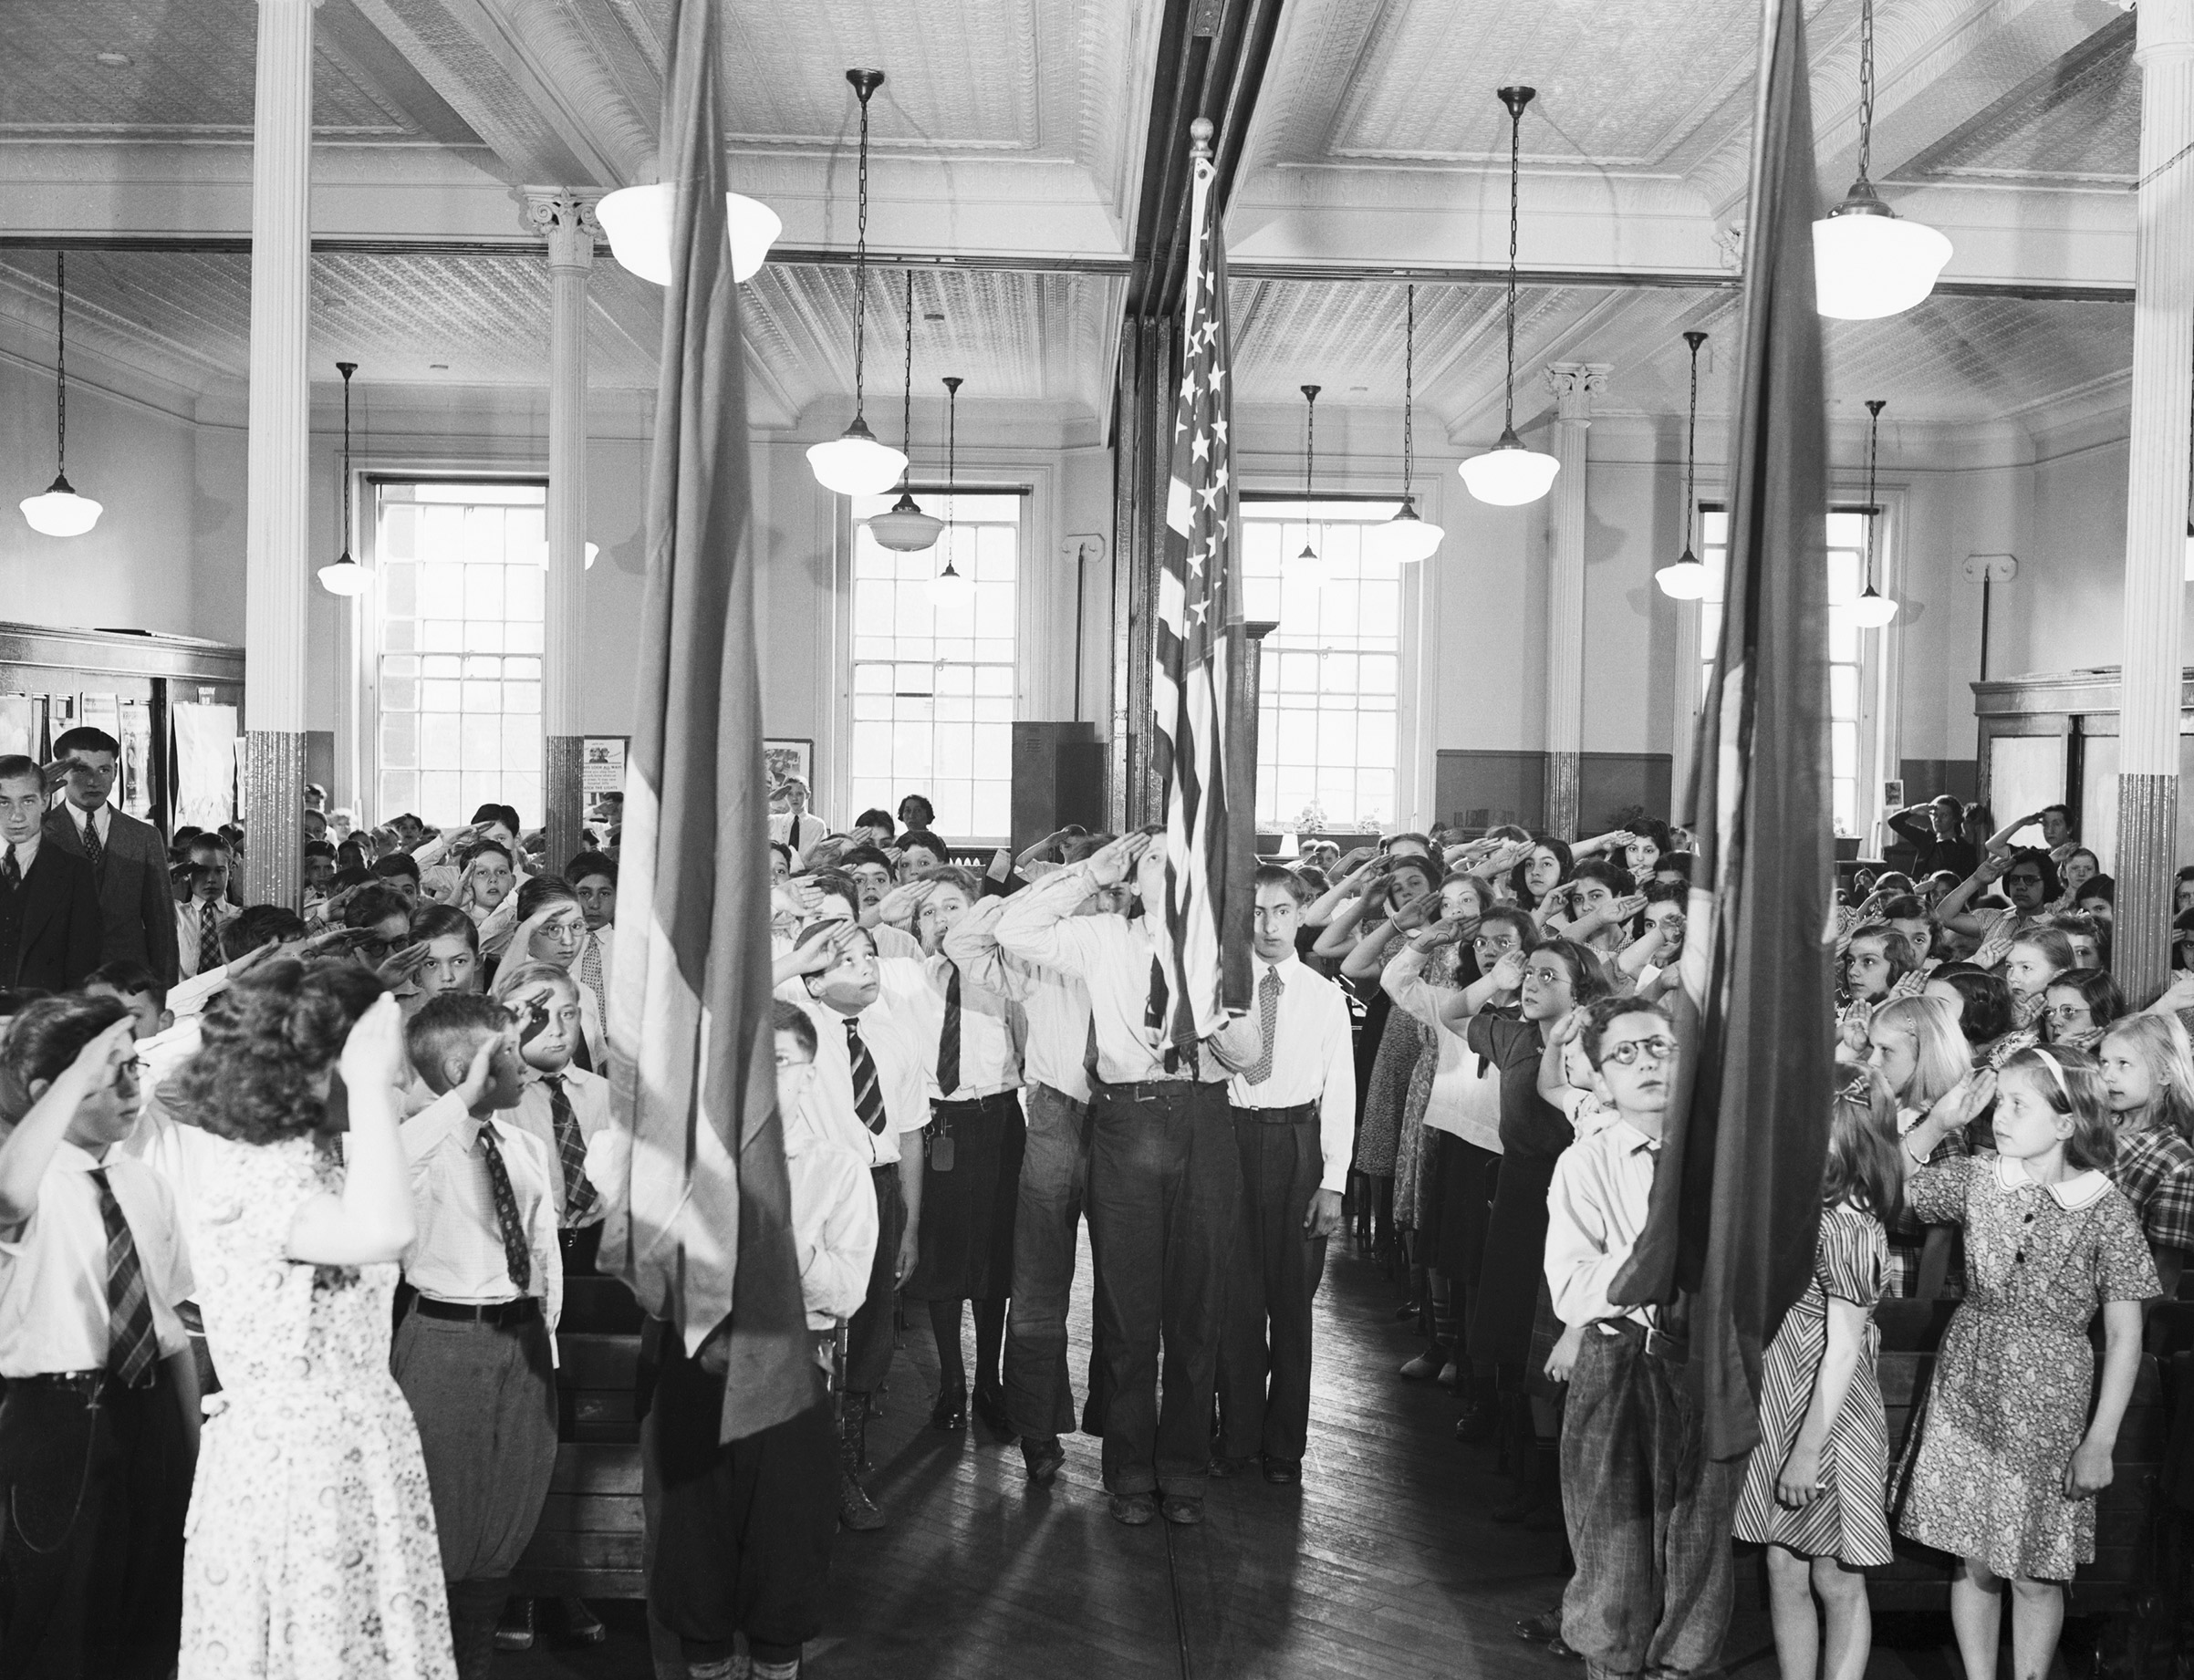 Students at P.S. #73 reciting the 'Pledge of Allegiance' on Jun. 1, 1938, in New York, N.Y. (Bettmann—Getty Images)